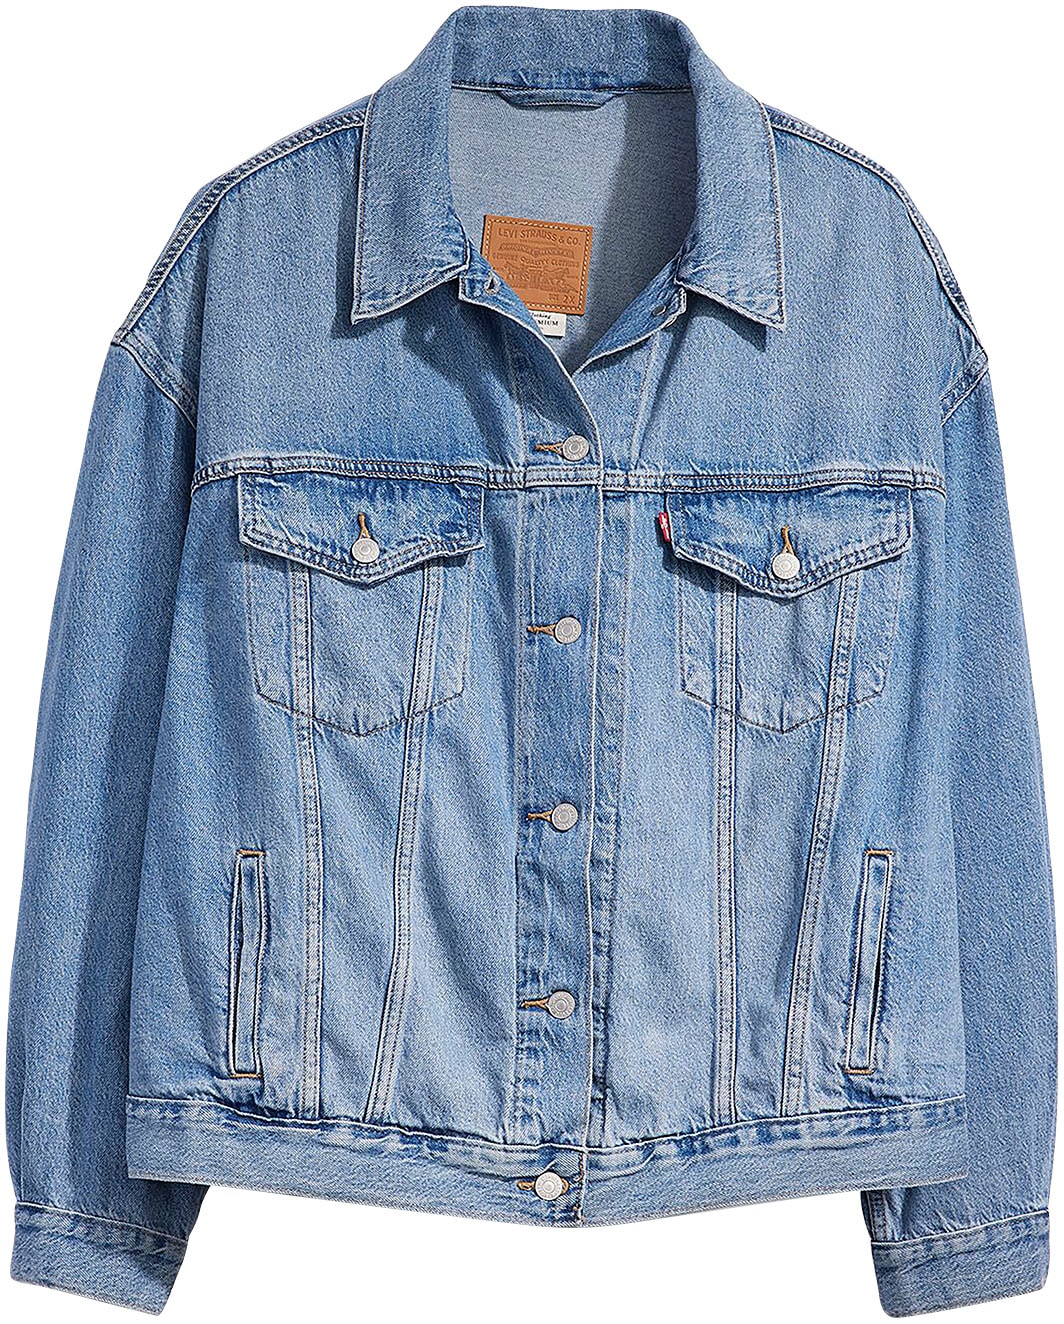 Levi's® Plus Jeansjacke »TRUCKER«, in leichter Used-Waschung